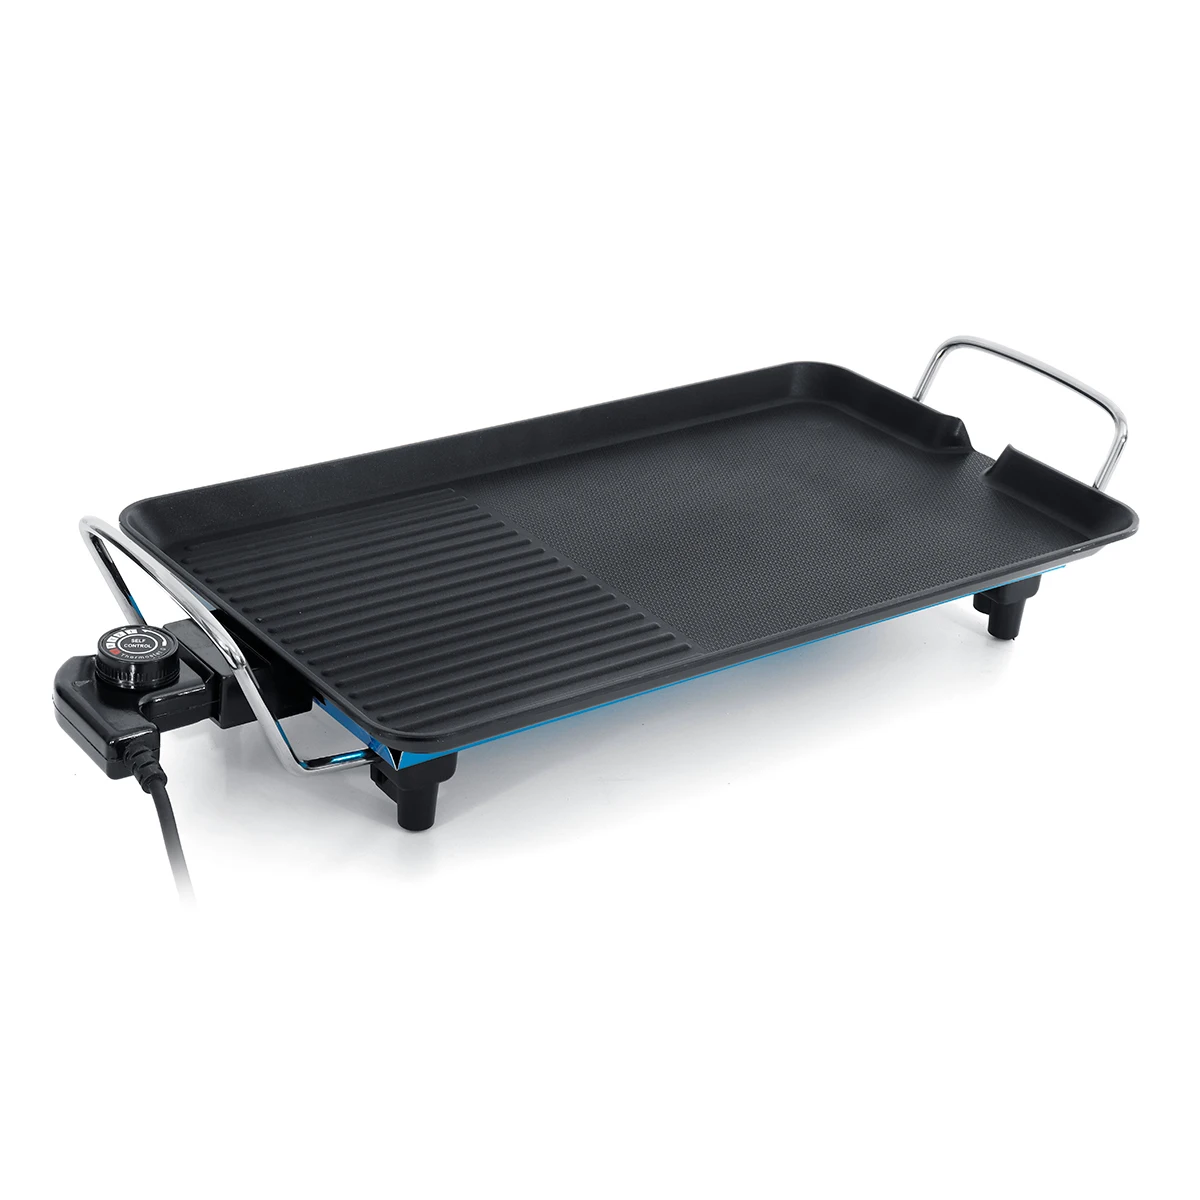 

Electric BBQ Grill 2000W Teppanyaki Table Top Non-stick Griddle Hot Plate Cook 5 Adjustable Temperature Control Anti Slip Feet